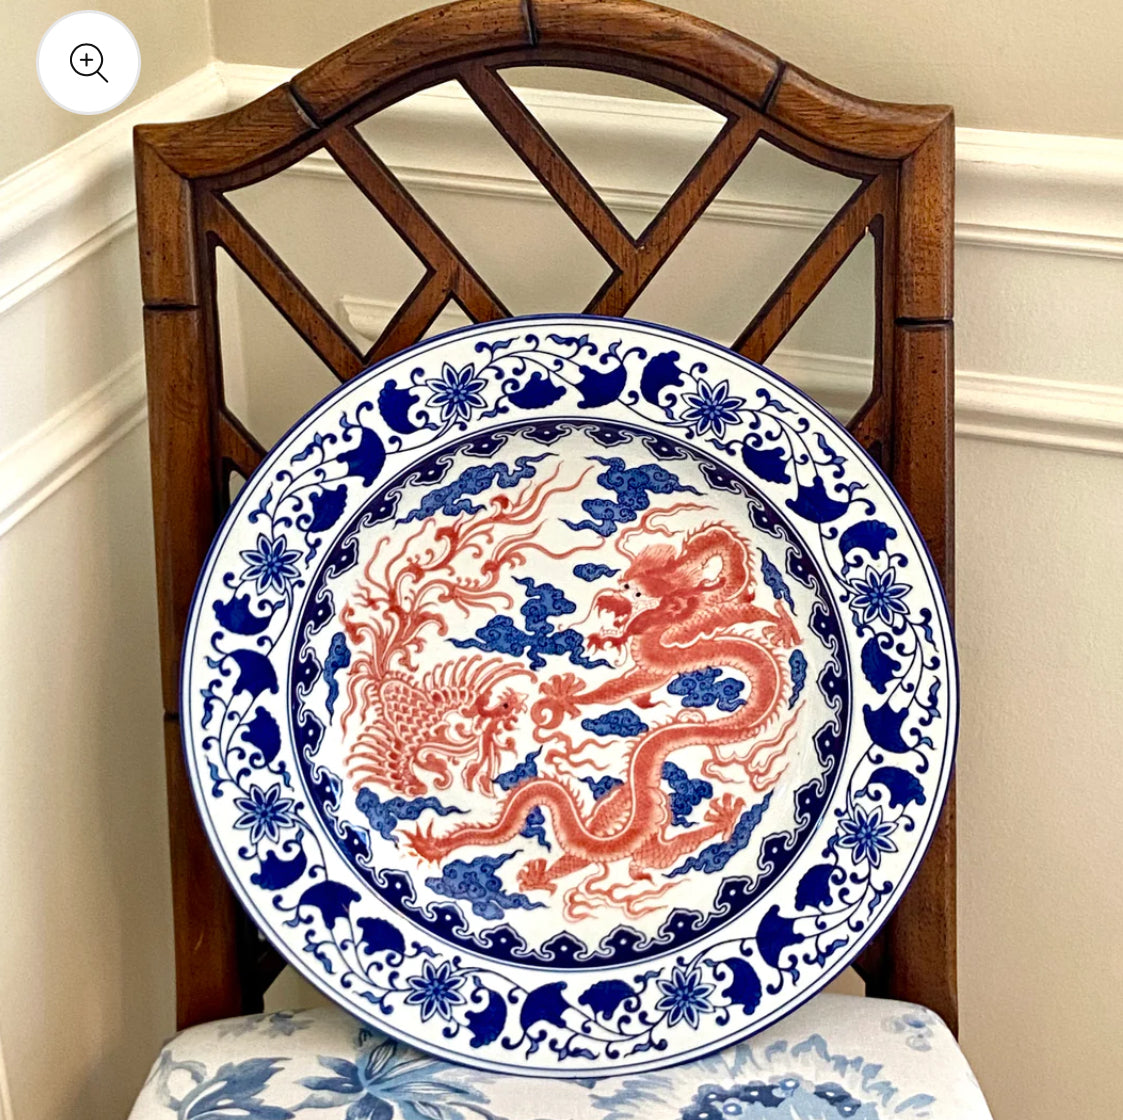 Large, 16”D blue & white chinoiserie chic wall platter - Excellent!